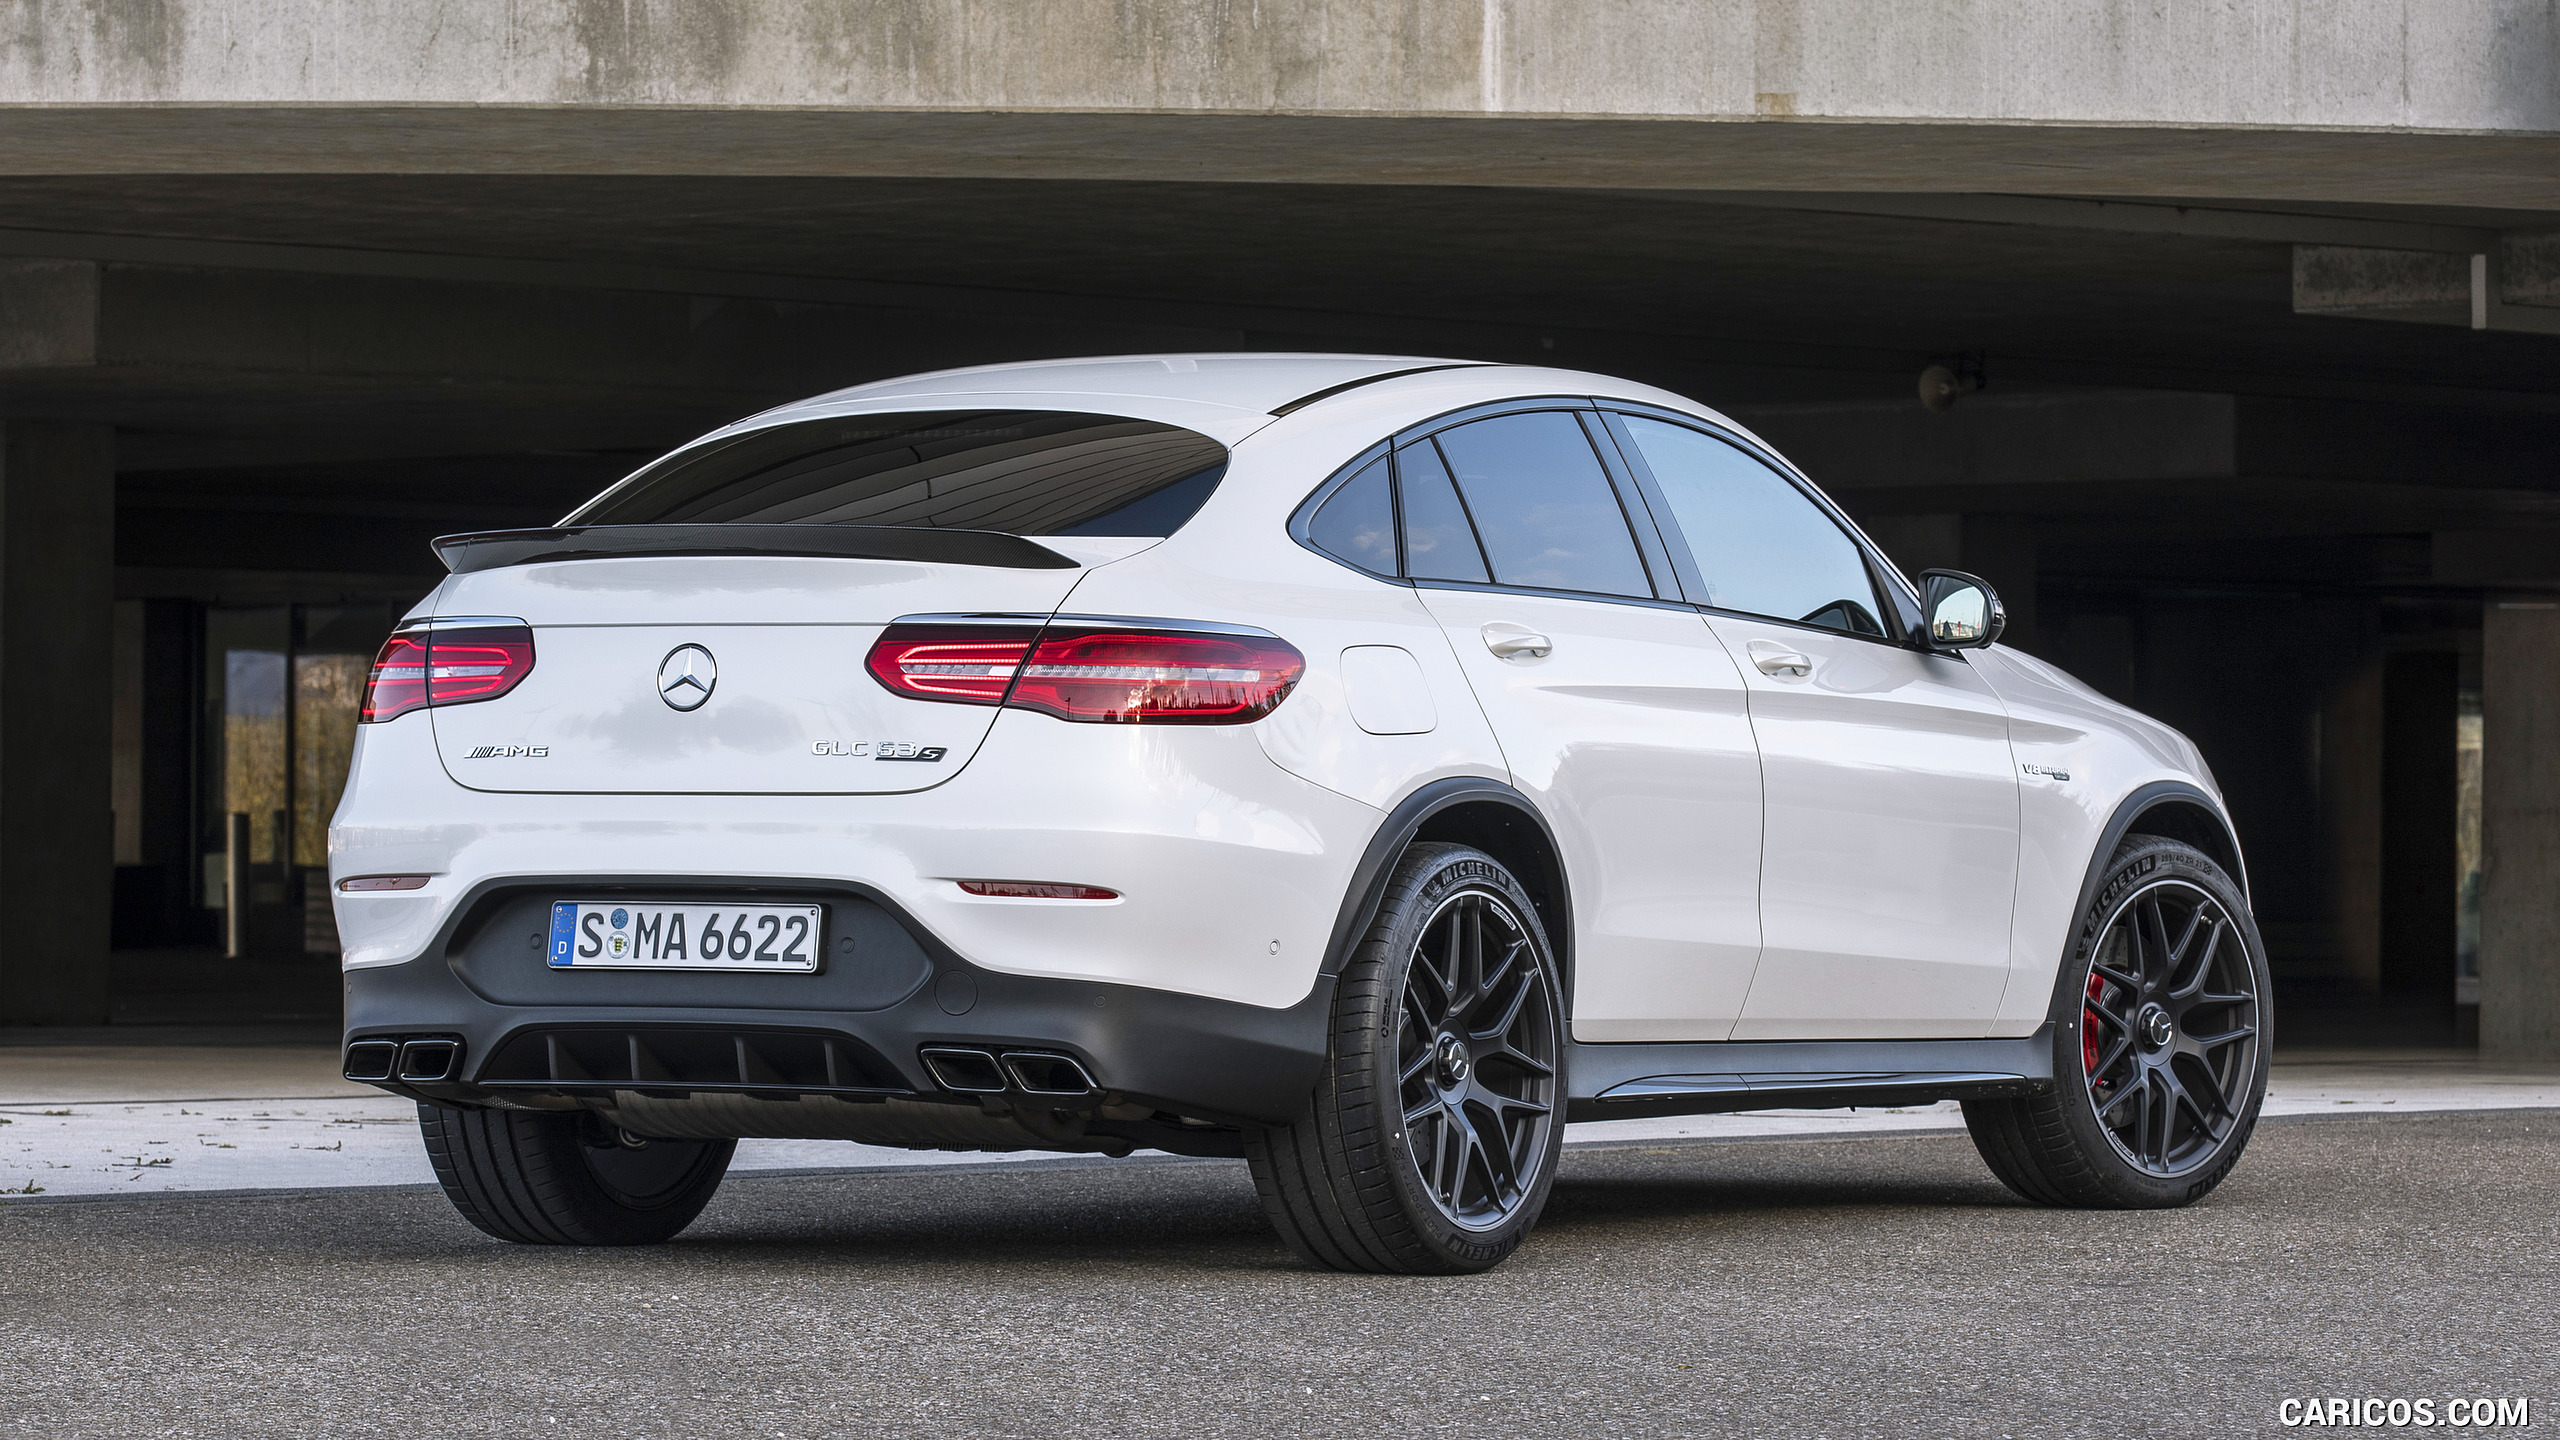 2018 Mercedes-AMG GLC 63 S Coupe - Rear Three-Quarter, #53 of 75